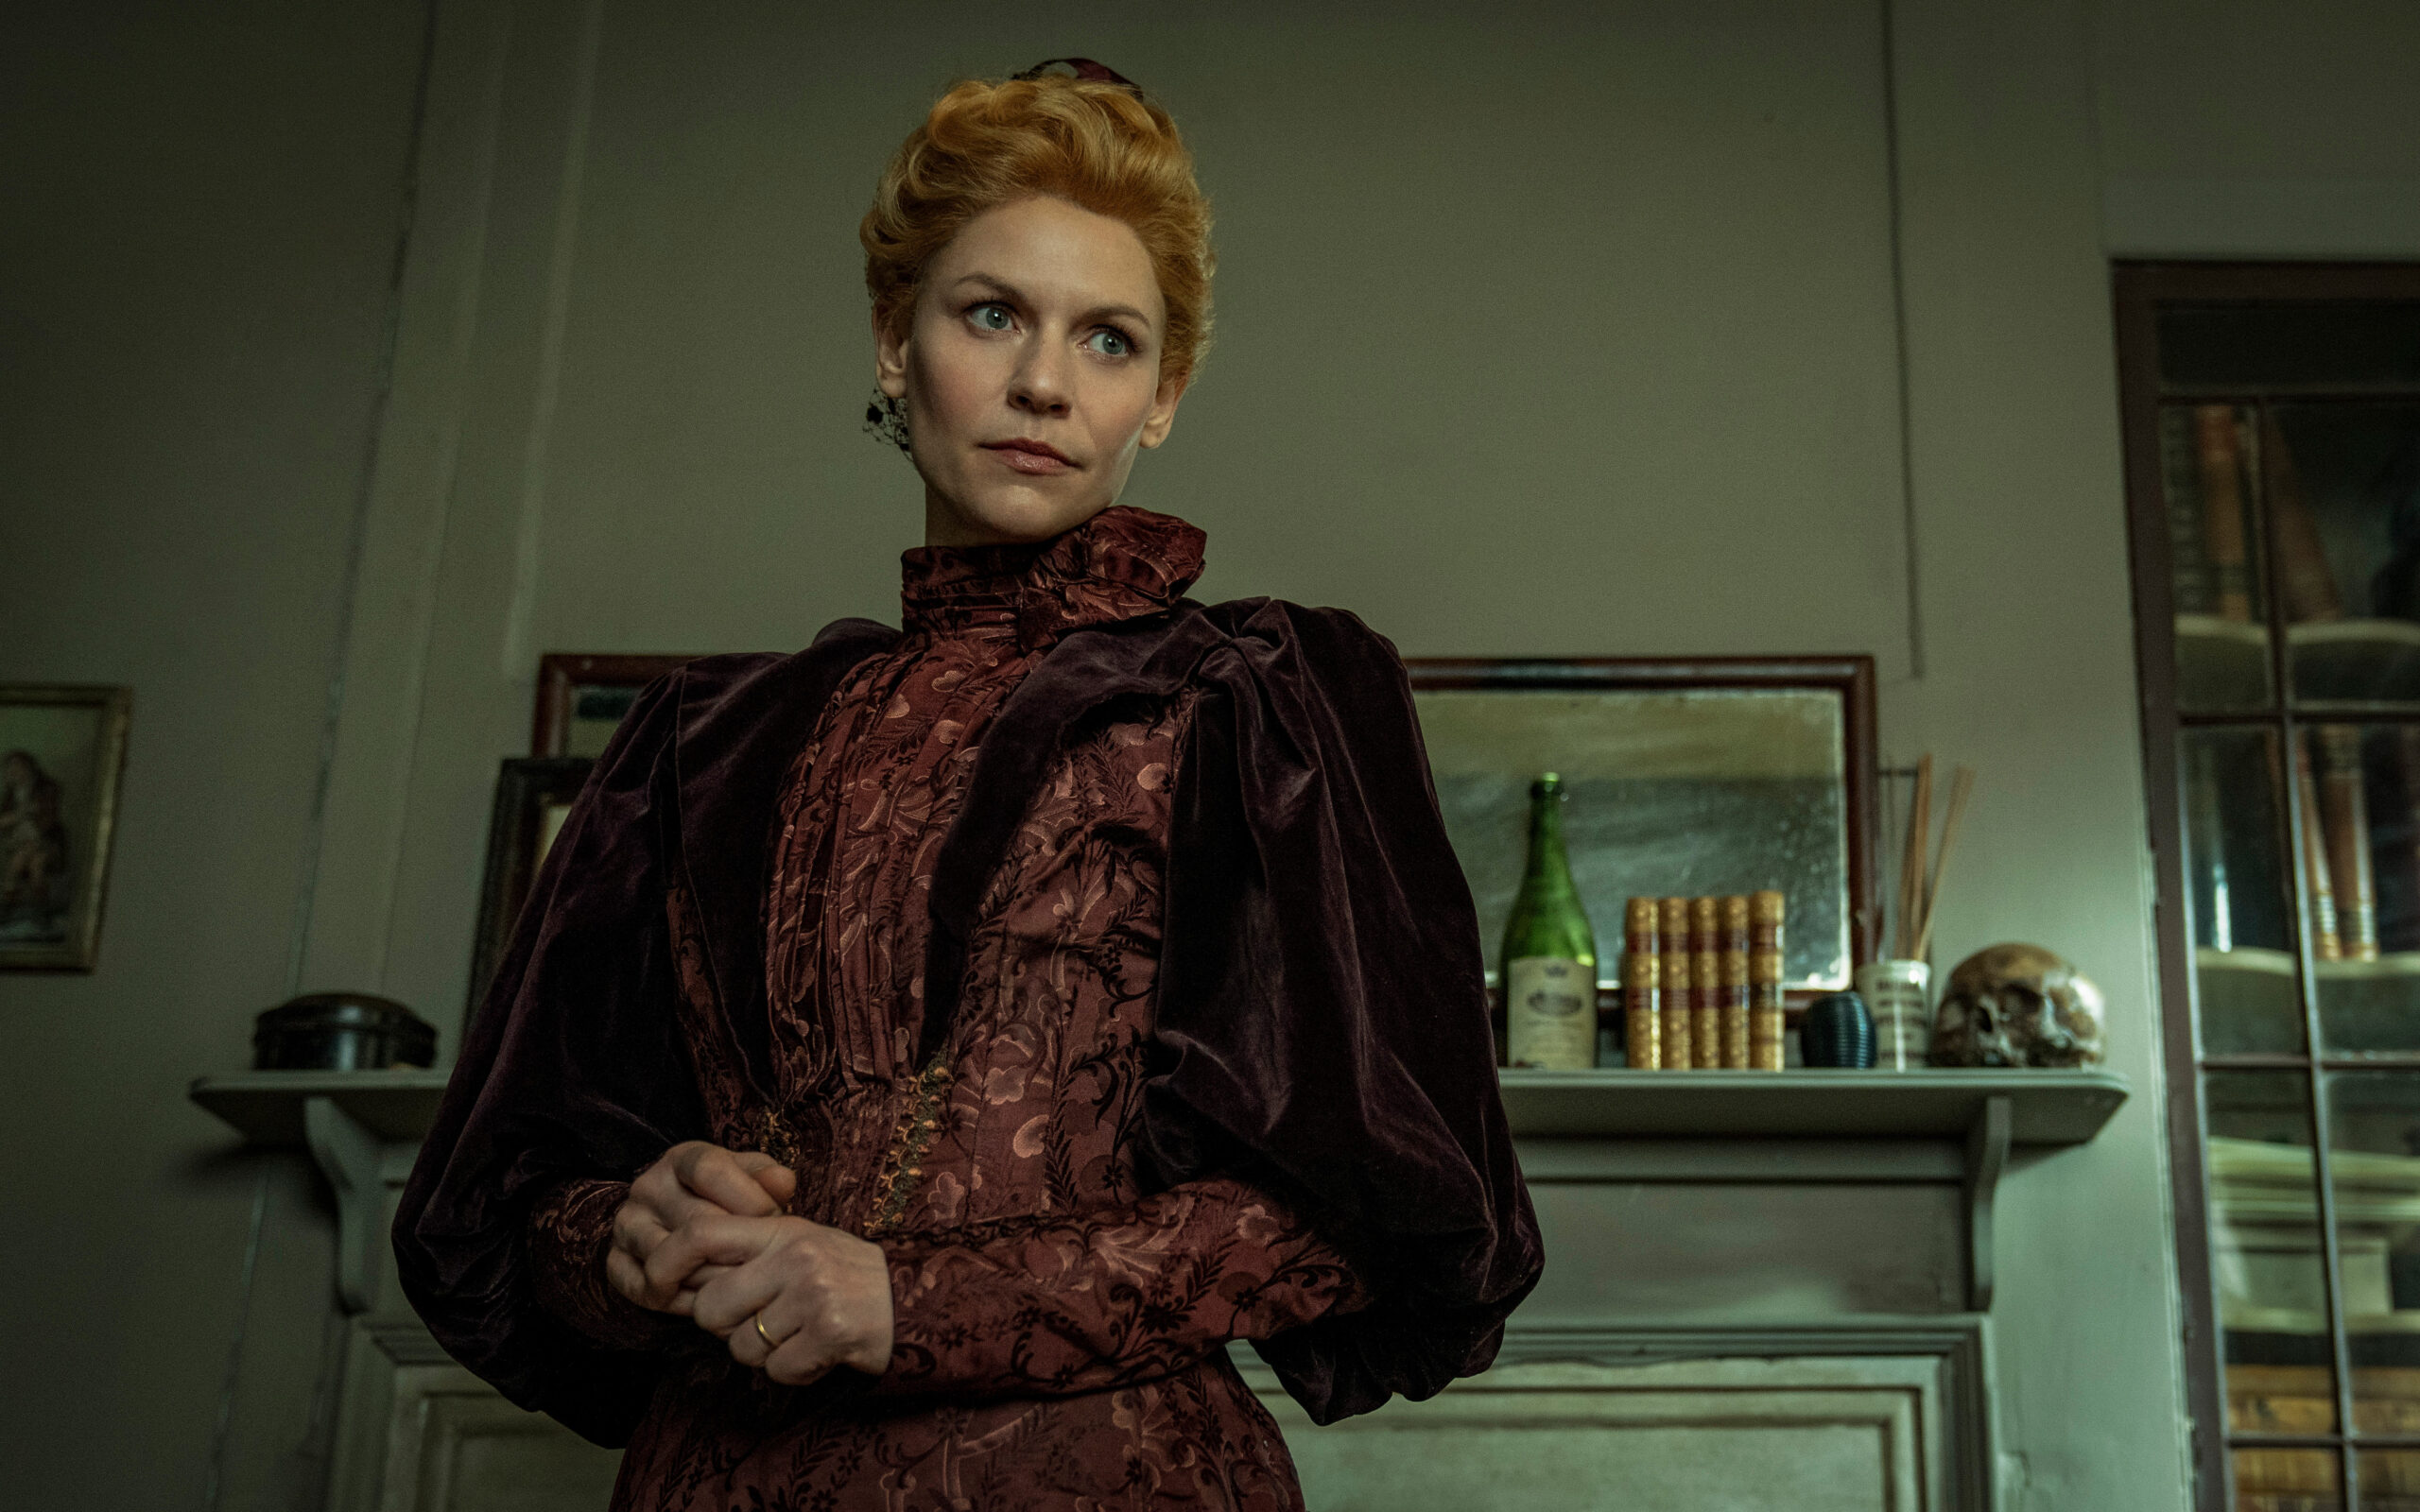 Claire Danes and Tom Hiddleston Stars in Apple TV+ “The Essex Serpent” 